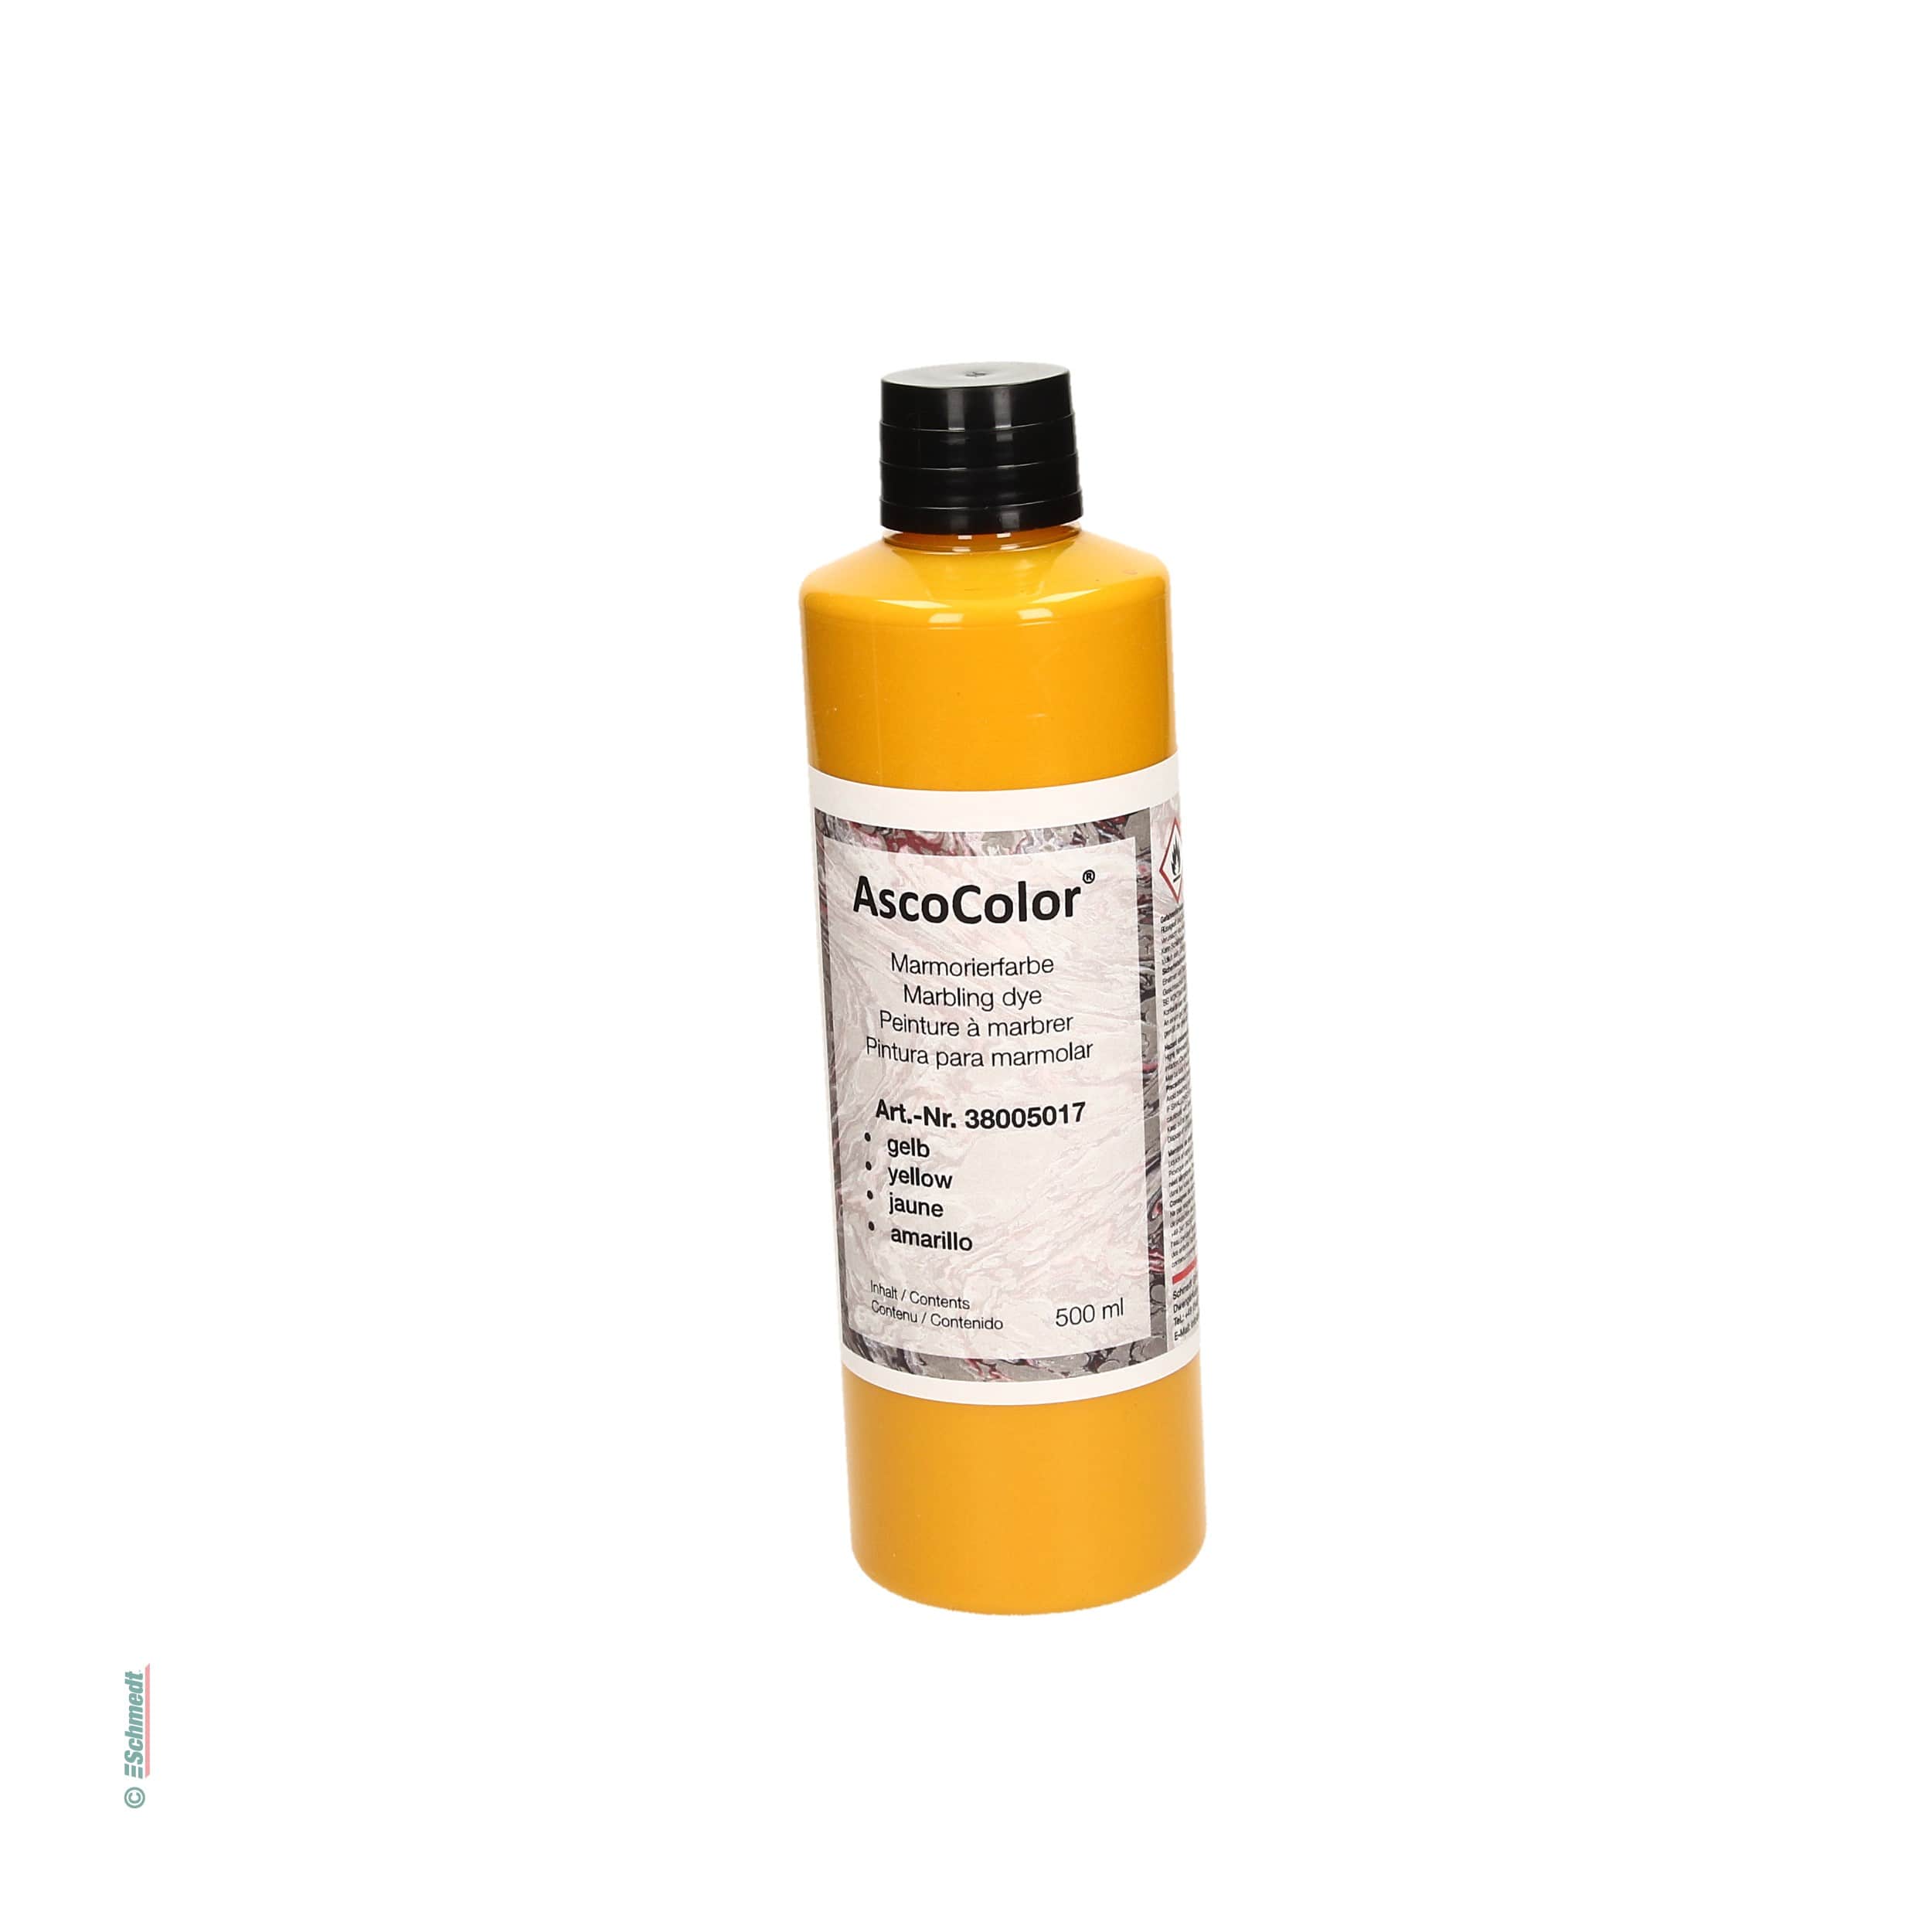 AscoColor® - Marbling dye - Colour yellow - Contents Bottle / 500 ml - to produce marbled papers... - image-2